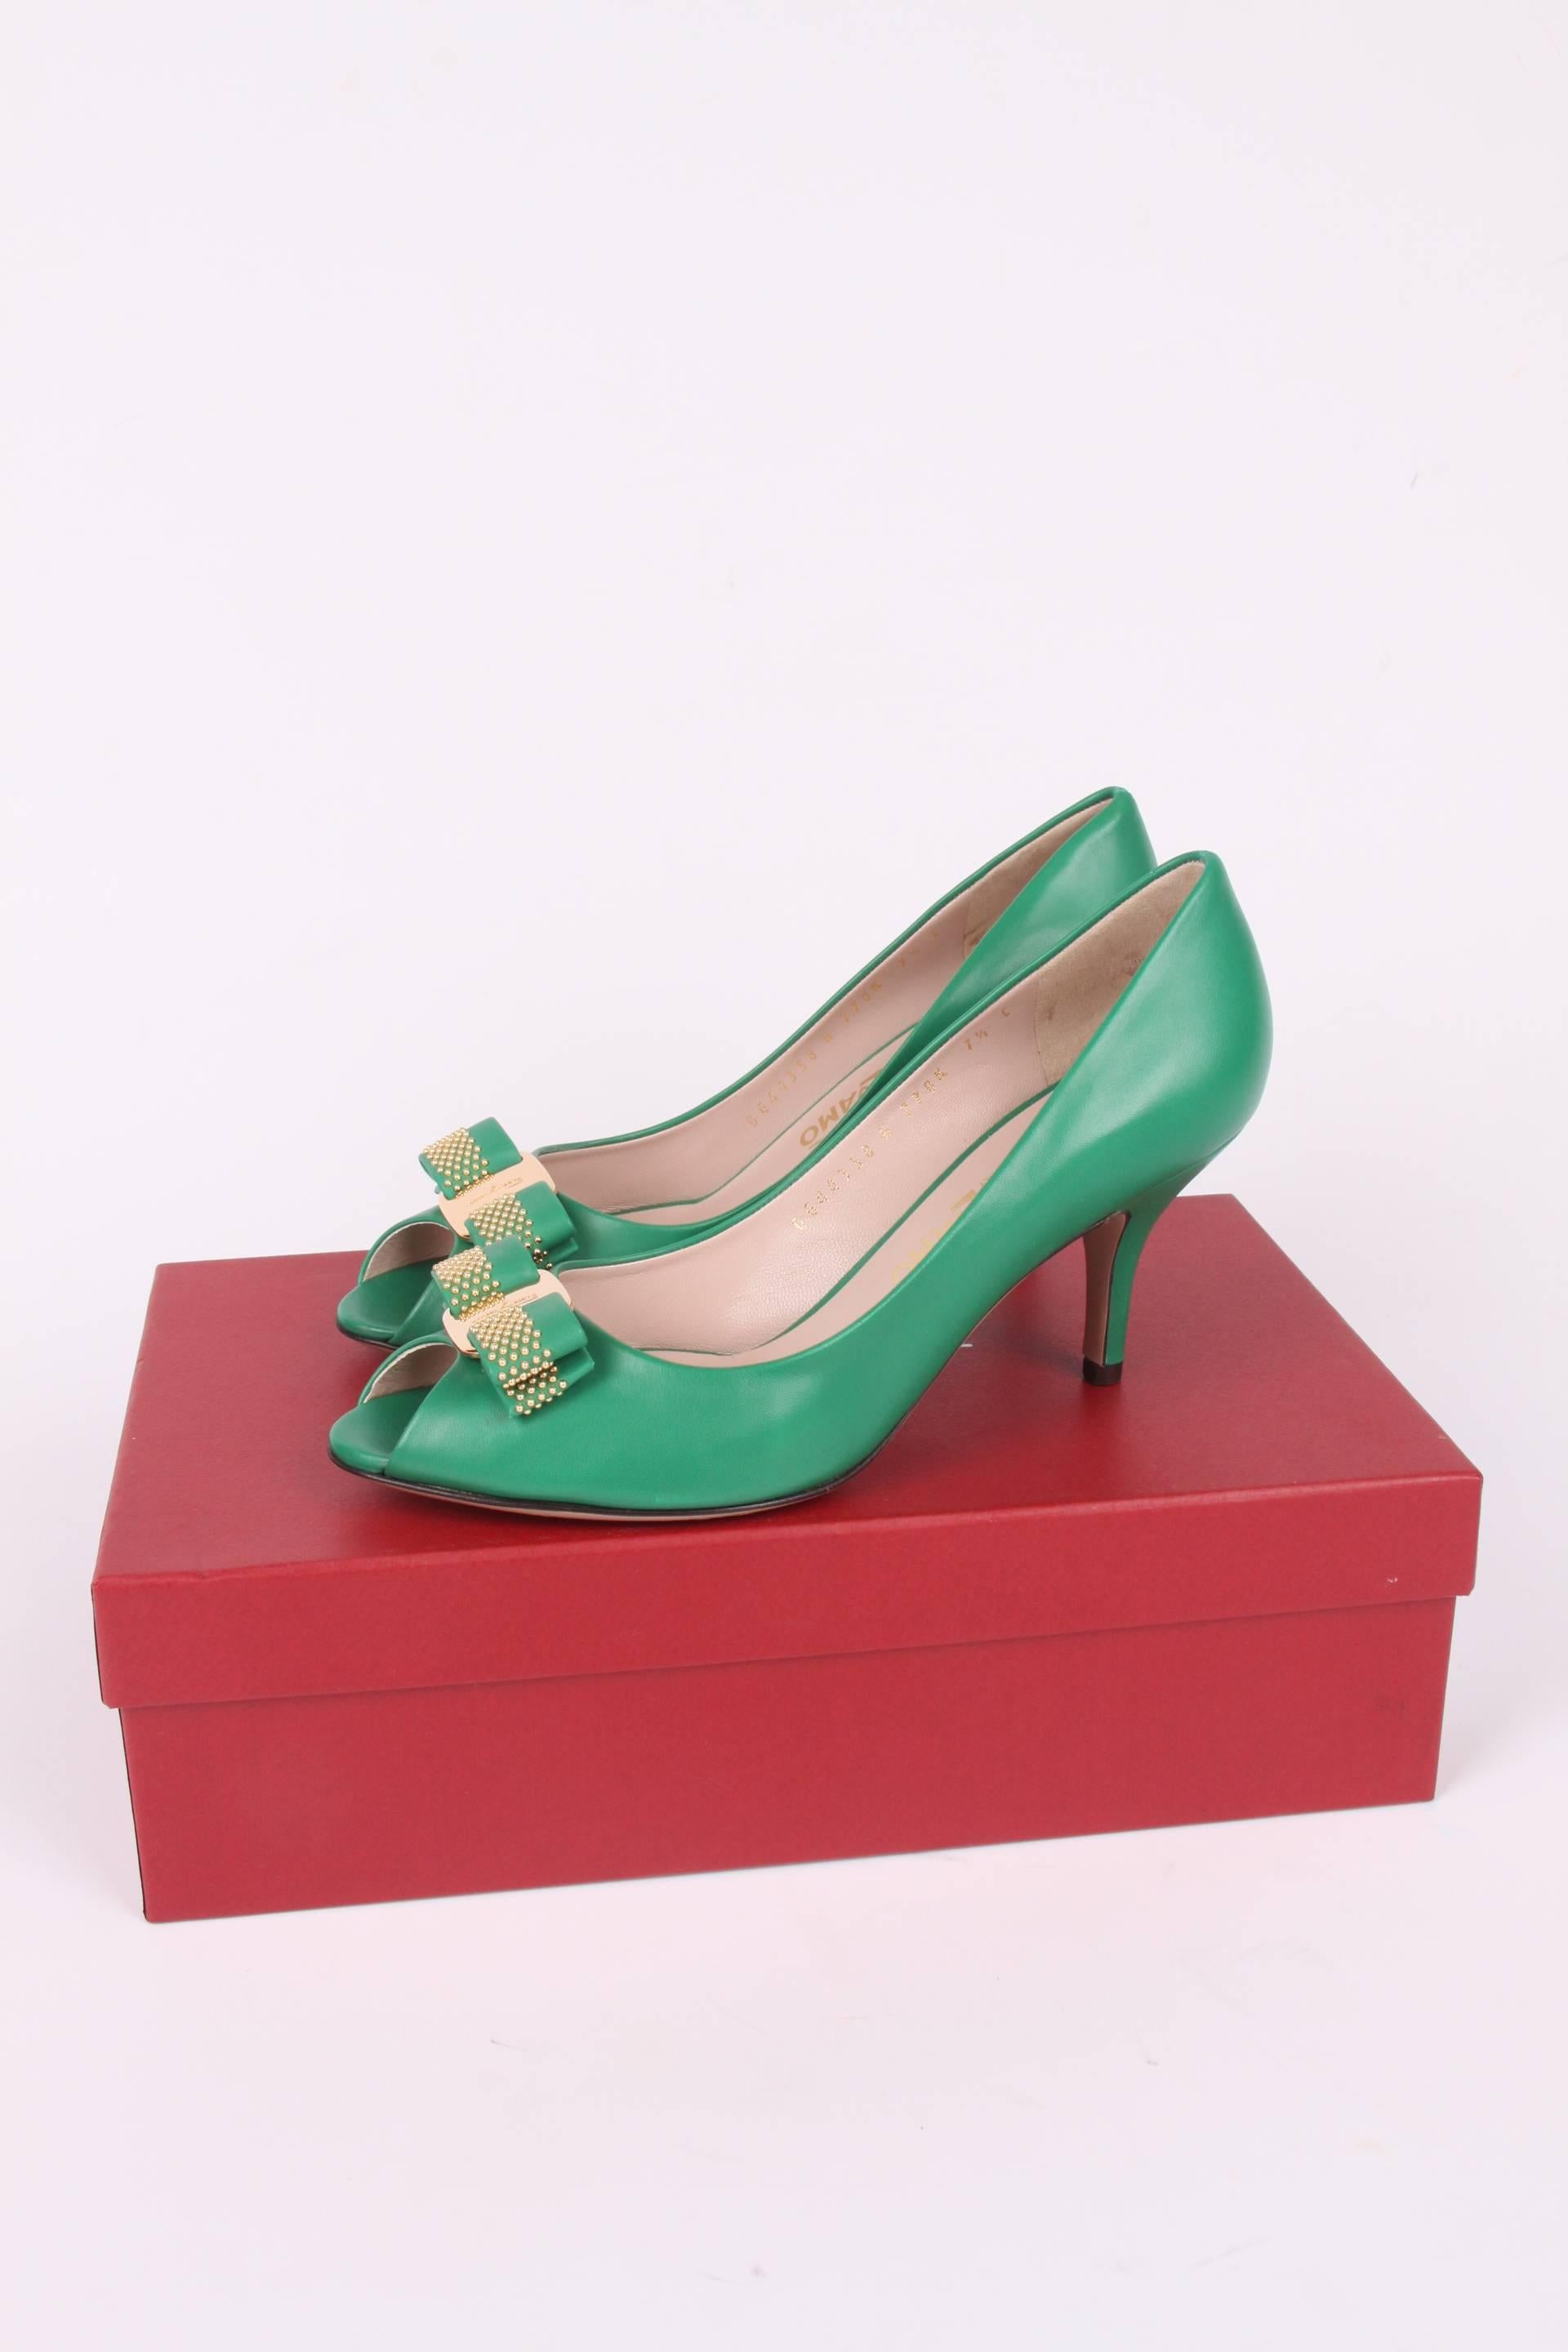 Cheerful pumps by Salvatore Ferragamo crafted in green leather.  

A peep-toe with a bow and a shiny gold-tone metal plaque with embossing of a Ferragamo logo. Leather outsole and a heel that measures 8 centimeters. Leather insole. 

New and never